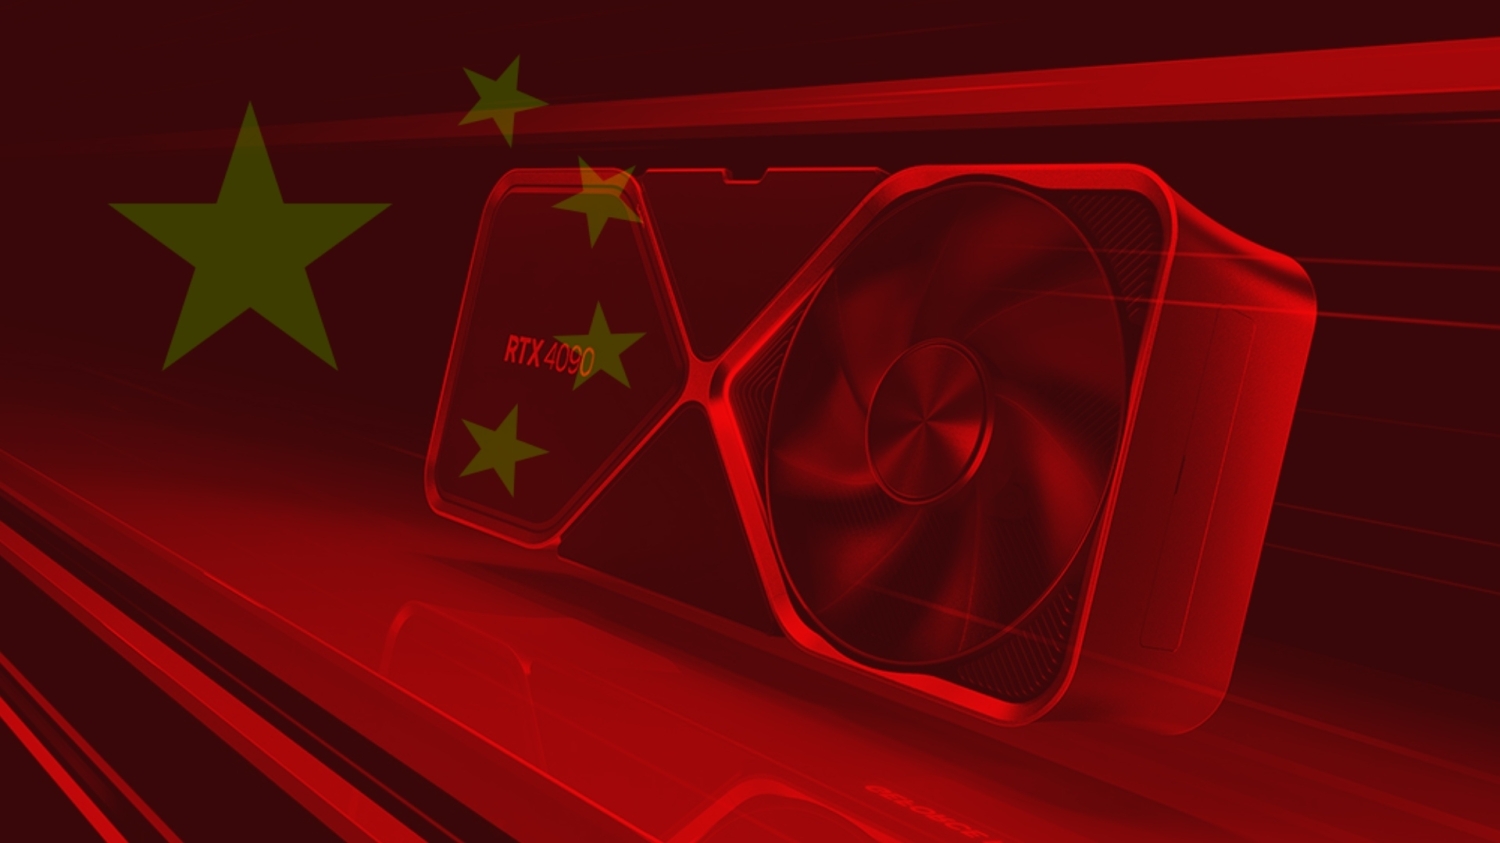 Weaker RTX 4090 could be coming to China next month with fewer CUDA cores  as NVIDIA's effort to bypass US sanctions -  News